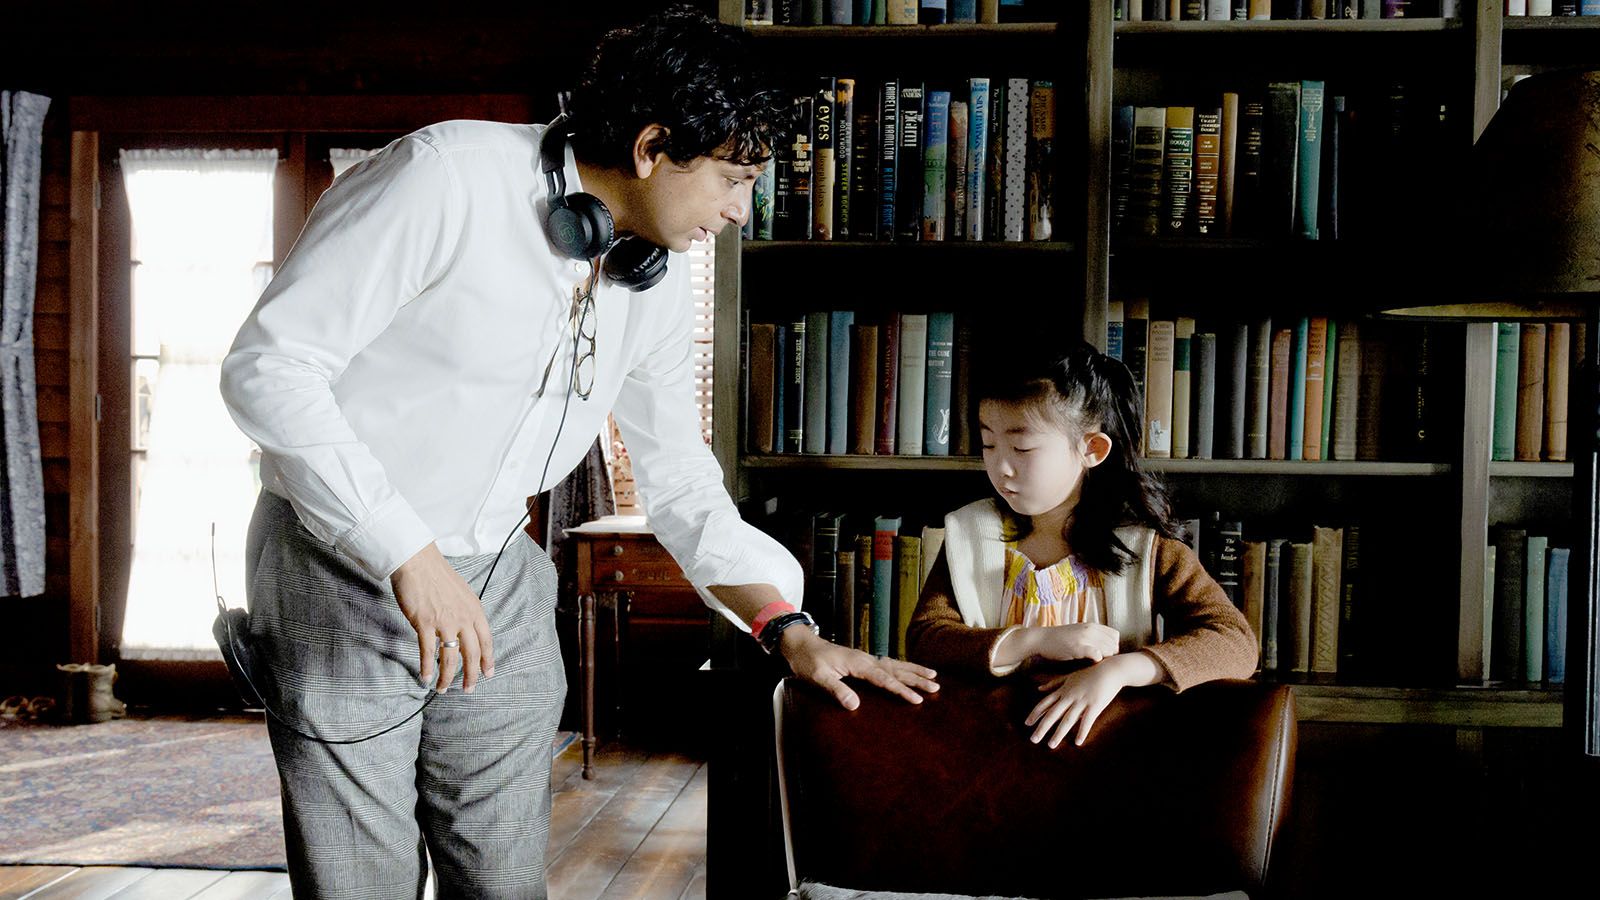 M. Night Shyamalan works with Kristen Cui during a scene in Knock at the Cabin, which opened as the No. 1 movie at the U.S. box office.